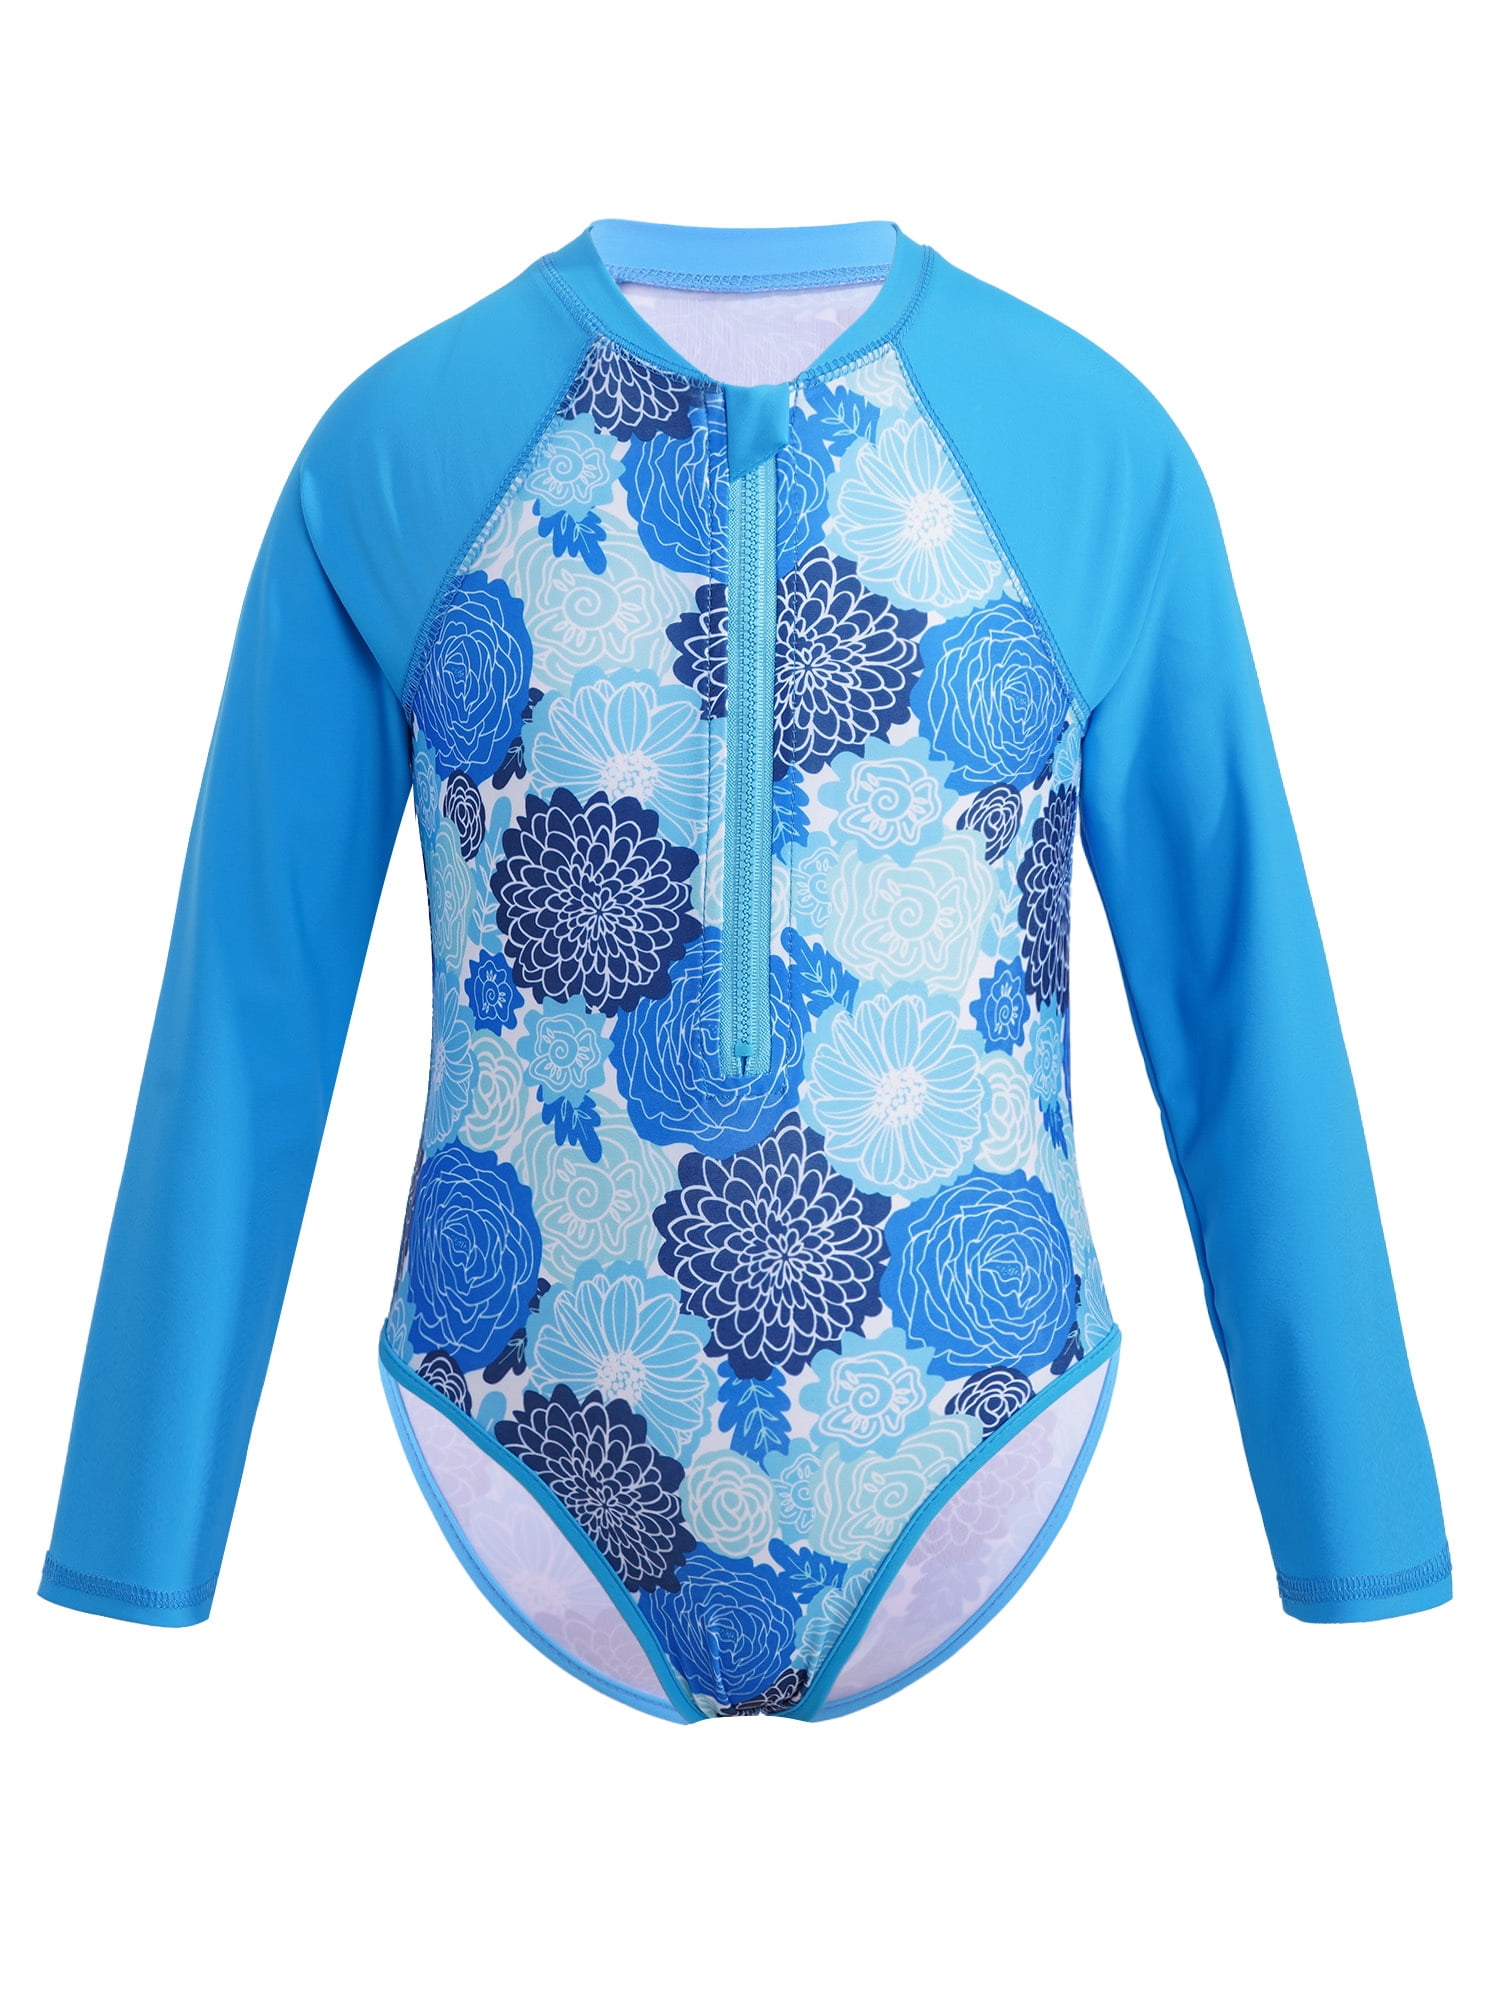 DPOIS Kids Girls One Piece Swimsuit Long Sleeves UPF 50+ Sun Protection ...